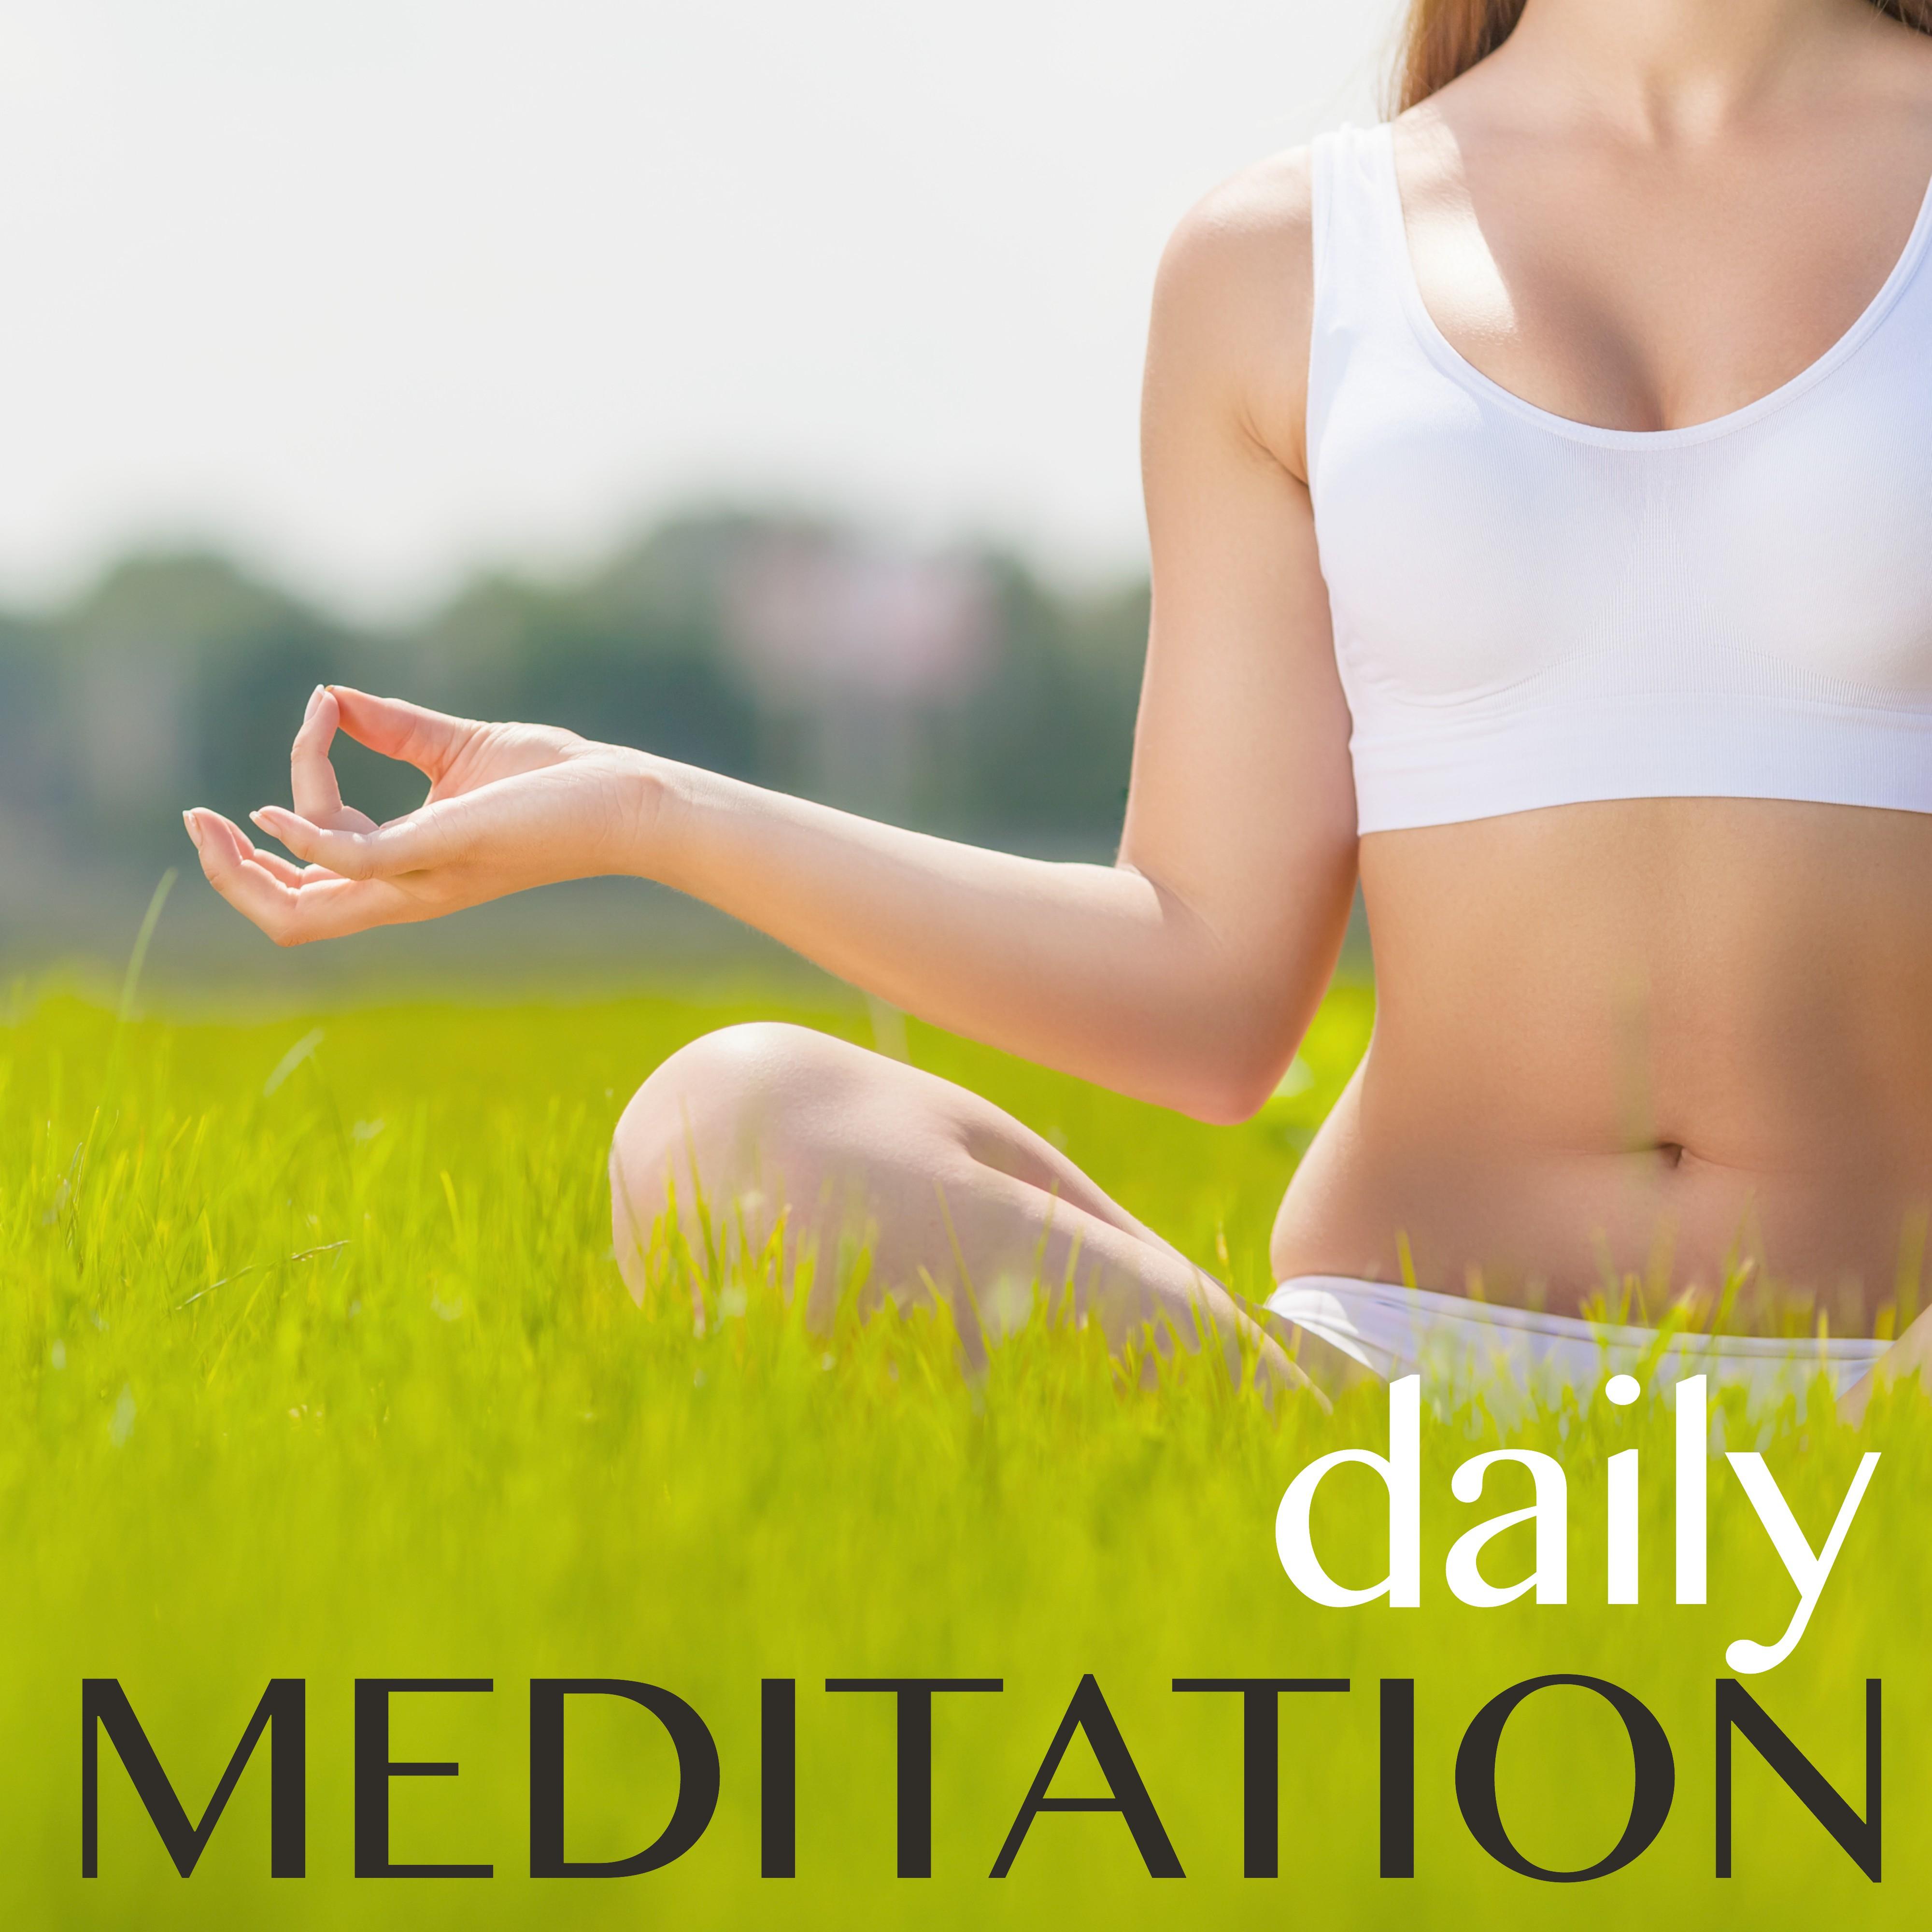 Daily Meditation - With Gentle RIver Sound and Solo Violin Music. Peaceful Spa Music for Spa Relaxation